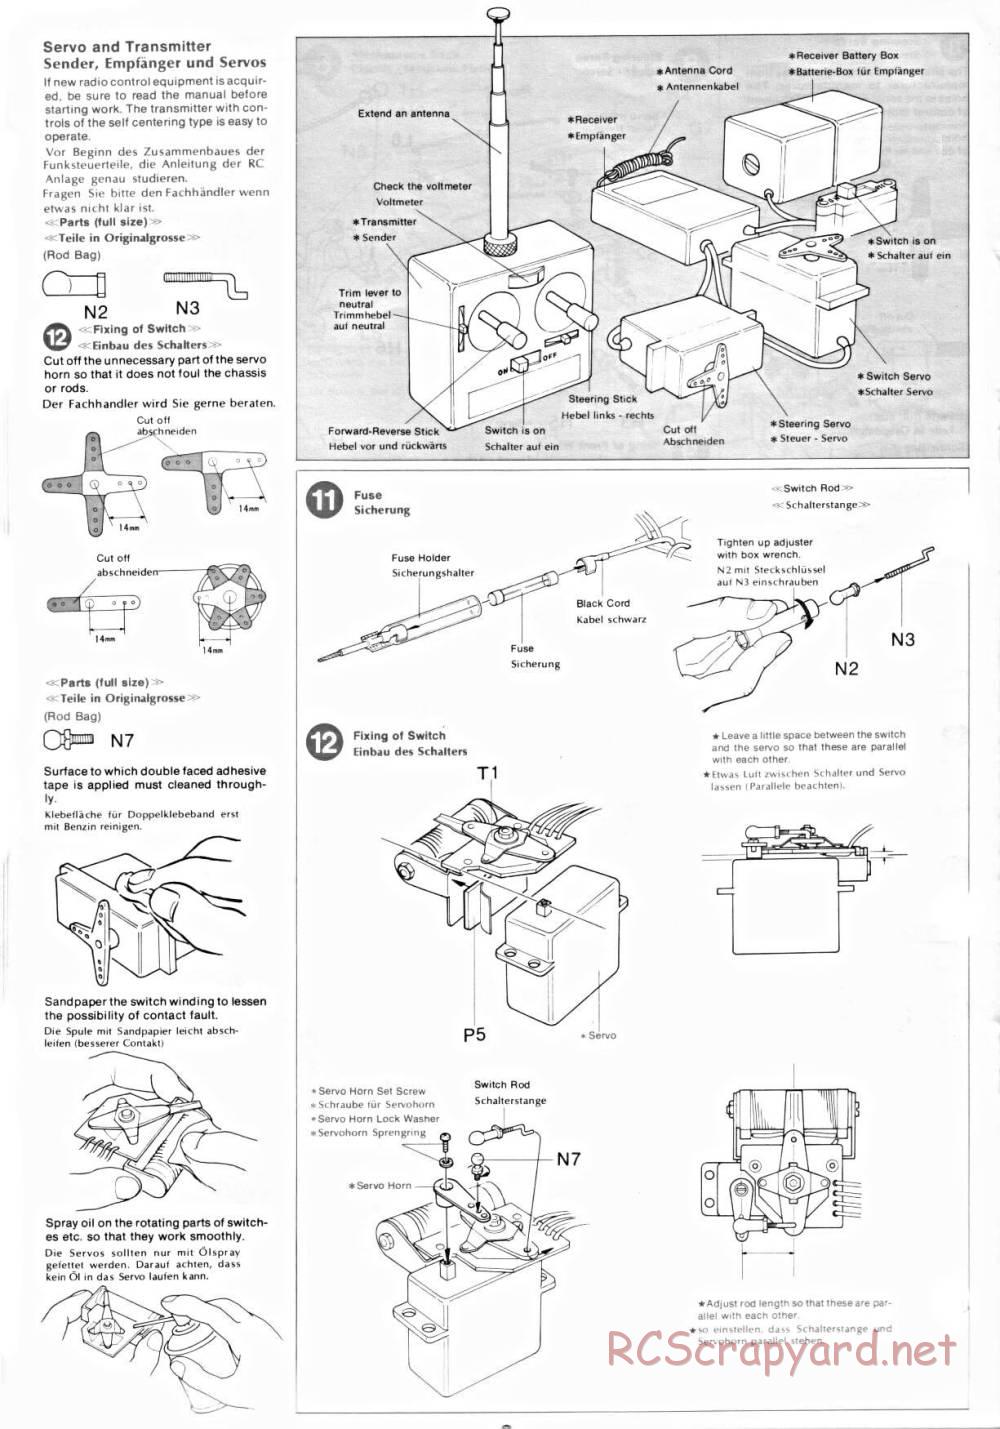 Tamiya - Lmbrghni Countach LP500S - 58005 - Manual - Page 8